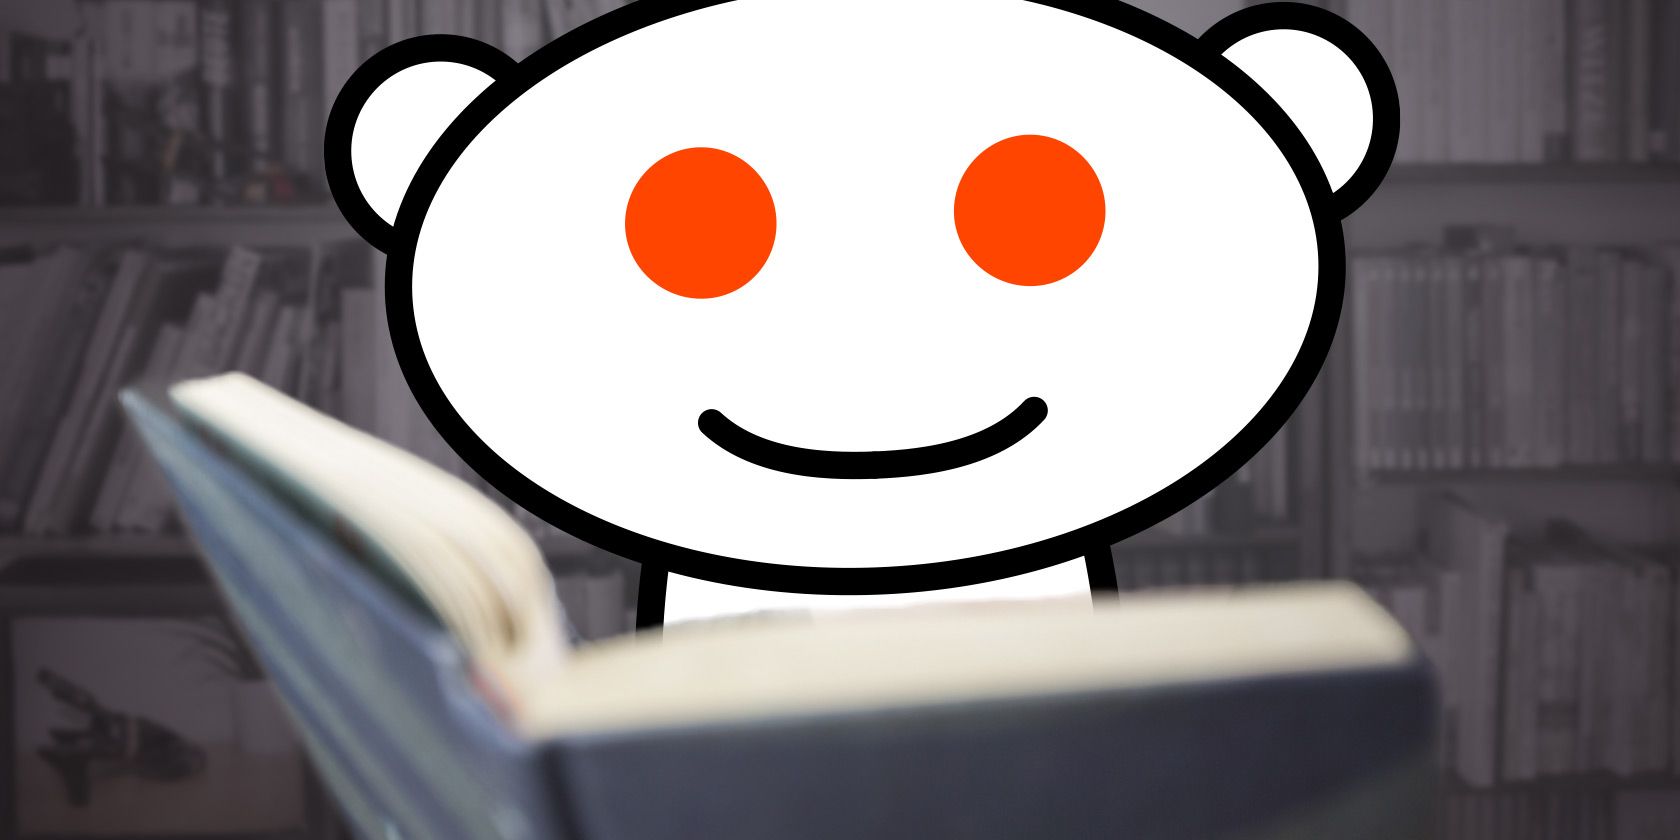 That's Novel! How to Find New Books to Read With Reddit